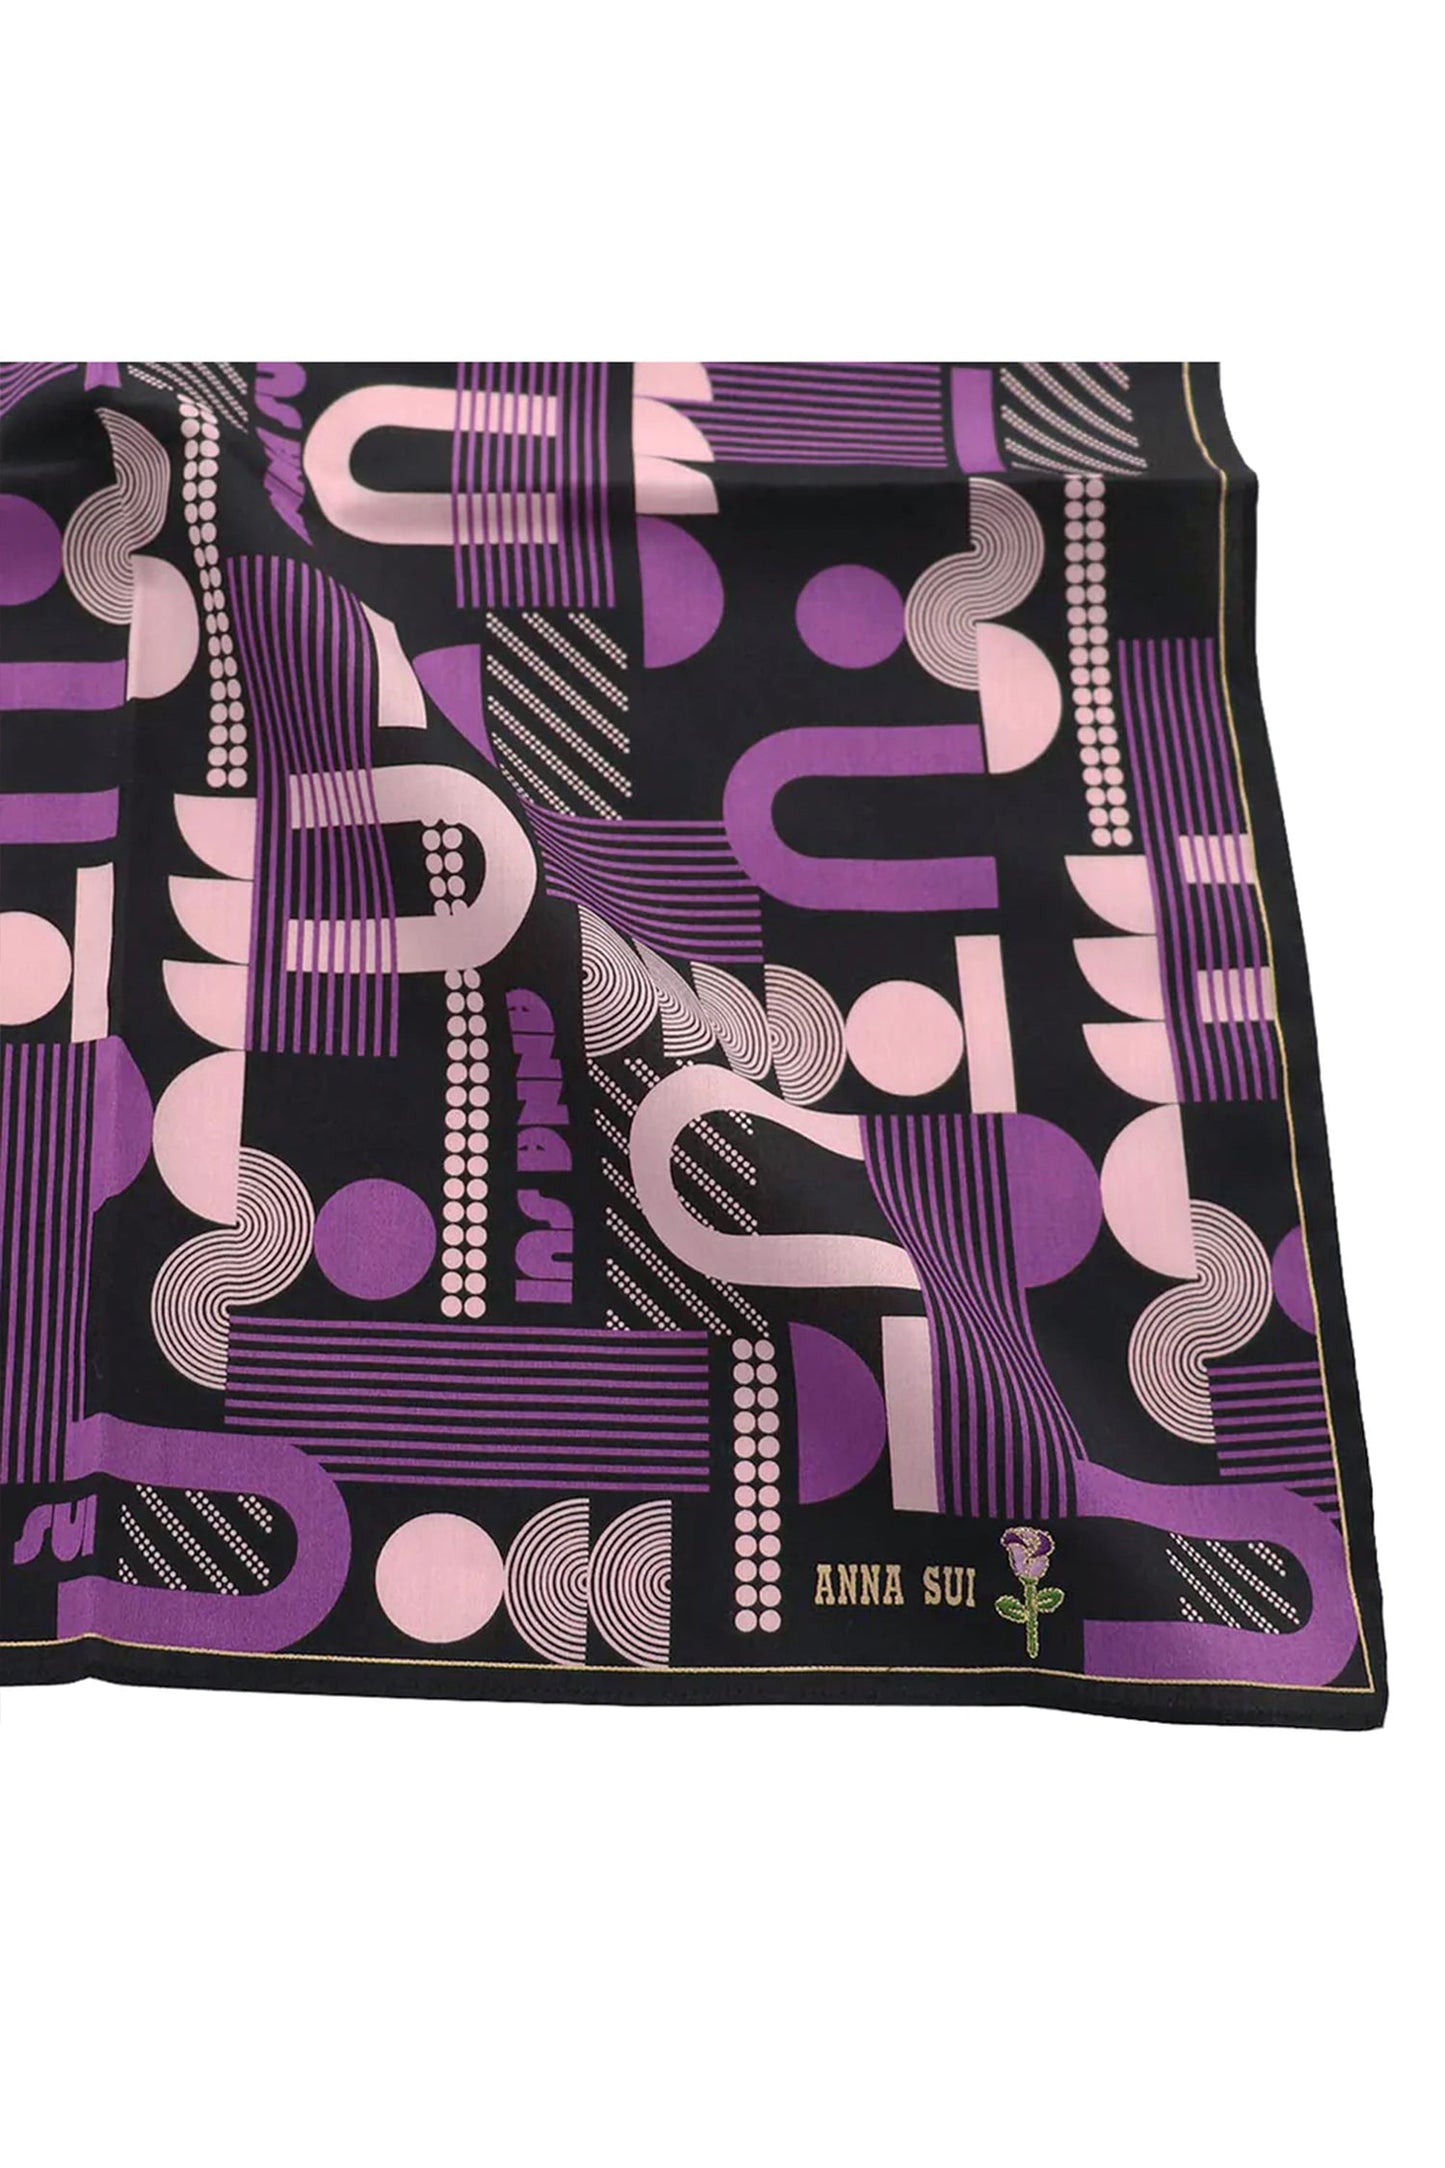 Squared Handkerchief in black with purple/white lines disco design, Anna’s label red rose